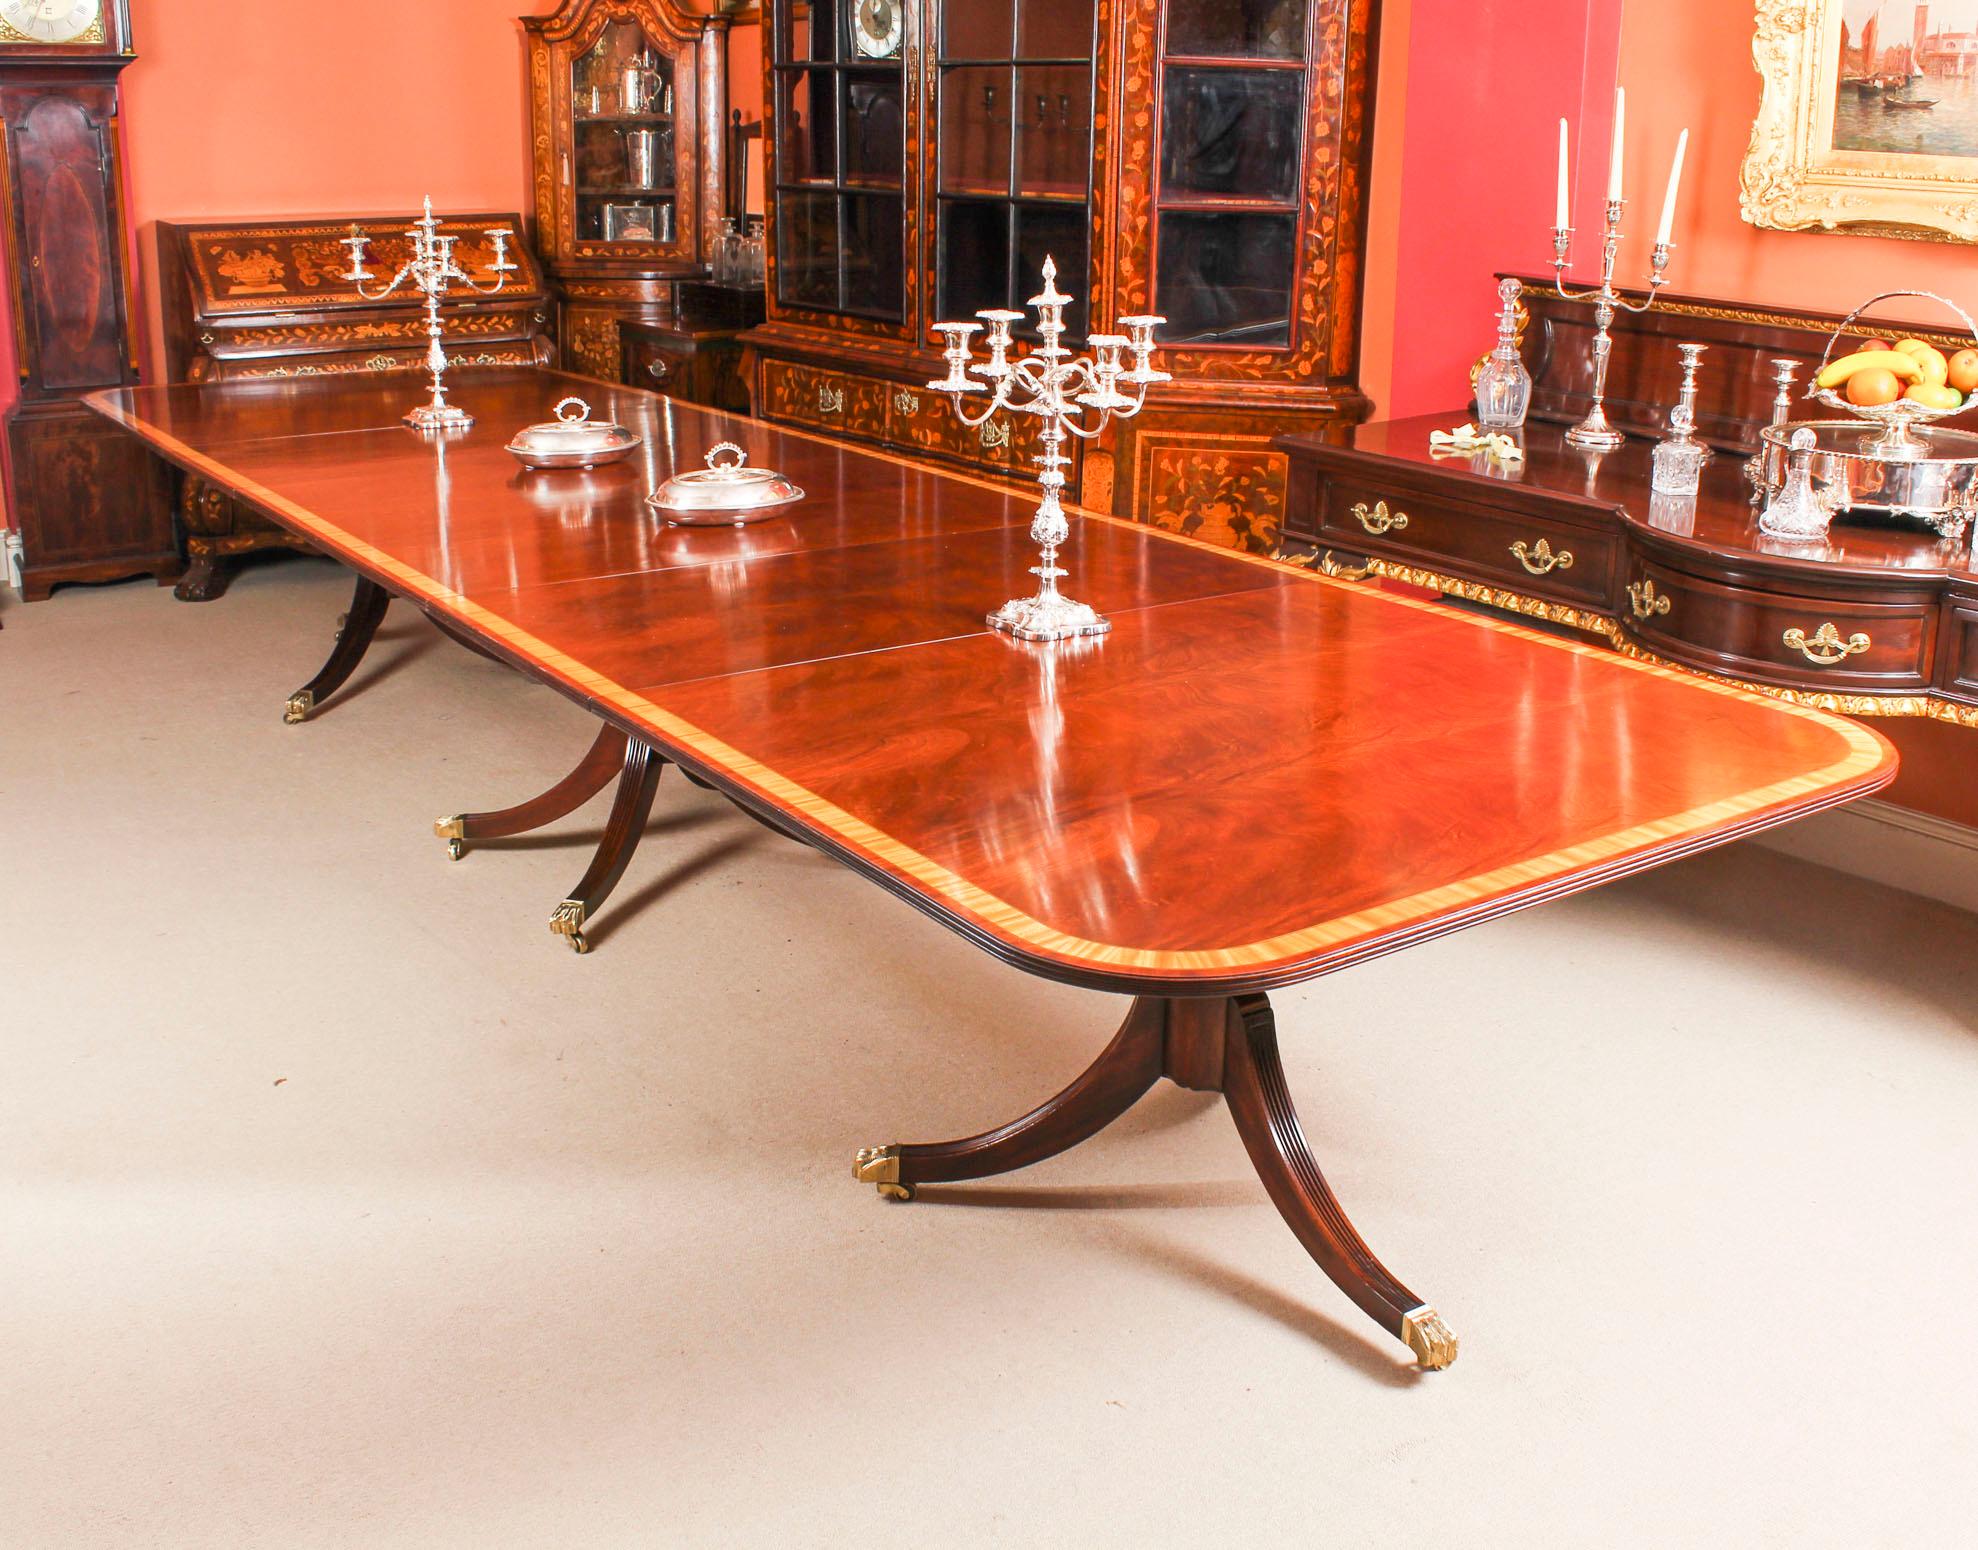 This is a superb large vintage handmade dining table in elegant Regency style, by the master cabinetmakers Arthur Brett, crafted in flame mahogany and featuring superb satinwood crossbanded decoration to the top, dating from the mid-20th